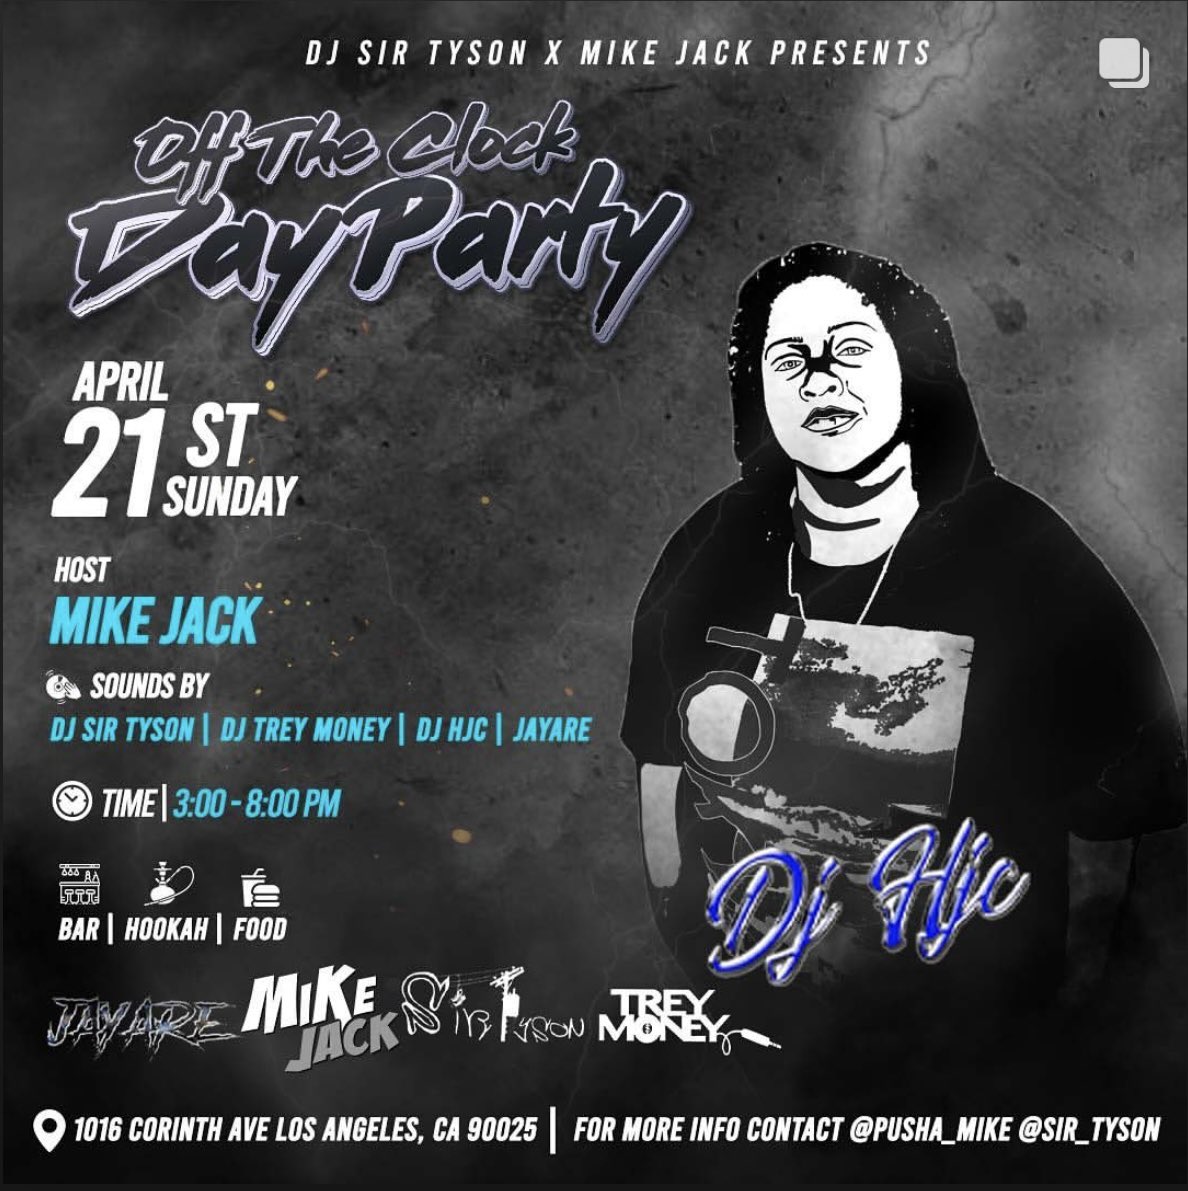 Day party going up this Sunday‼️ Some of LA’s hottest DJs will be providing the vibes so you don’t want to miss this! Hit up @Sir_Tyson for tickets 🎫 #offtheclock #dayparty #sundayfunday #bar #food #hookah #hottestdjs #losangeles #daypartyvibes